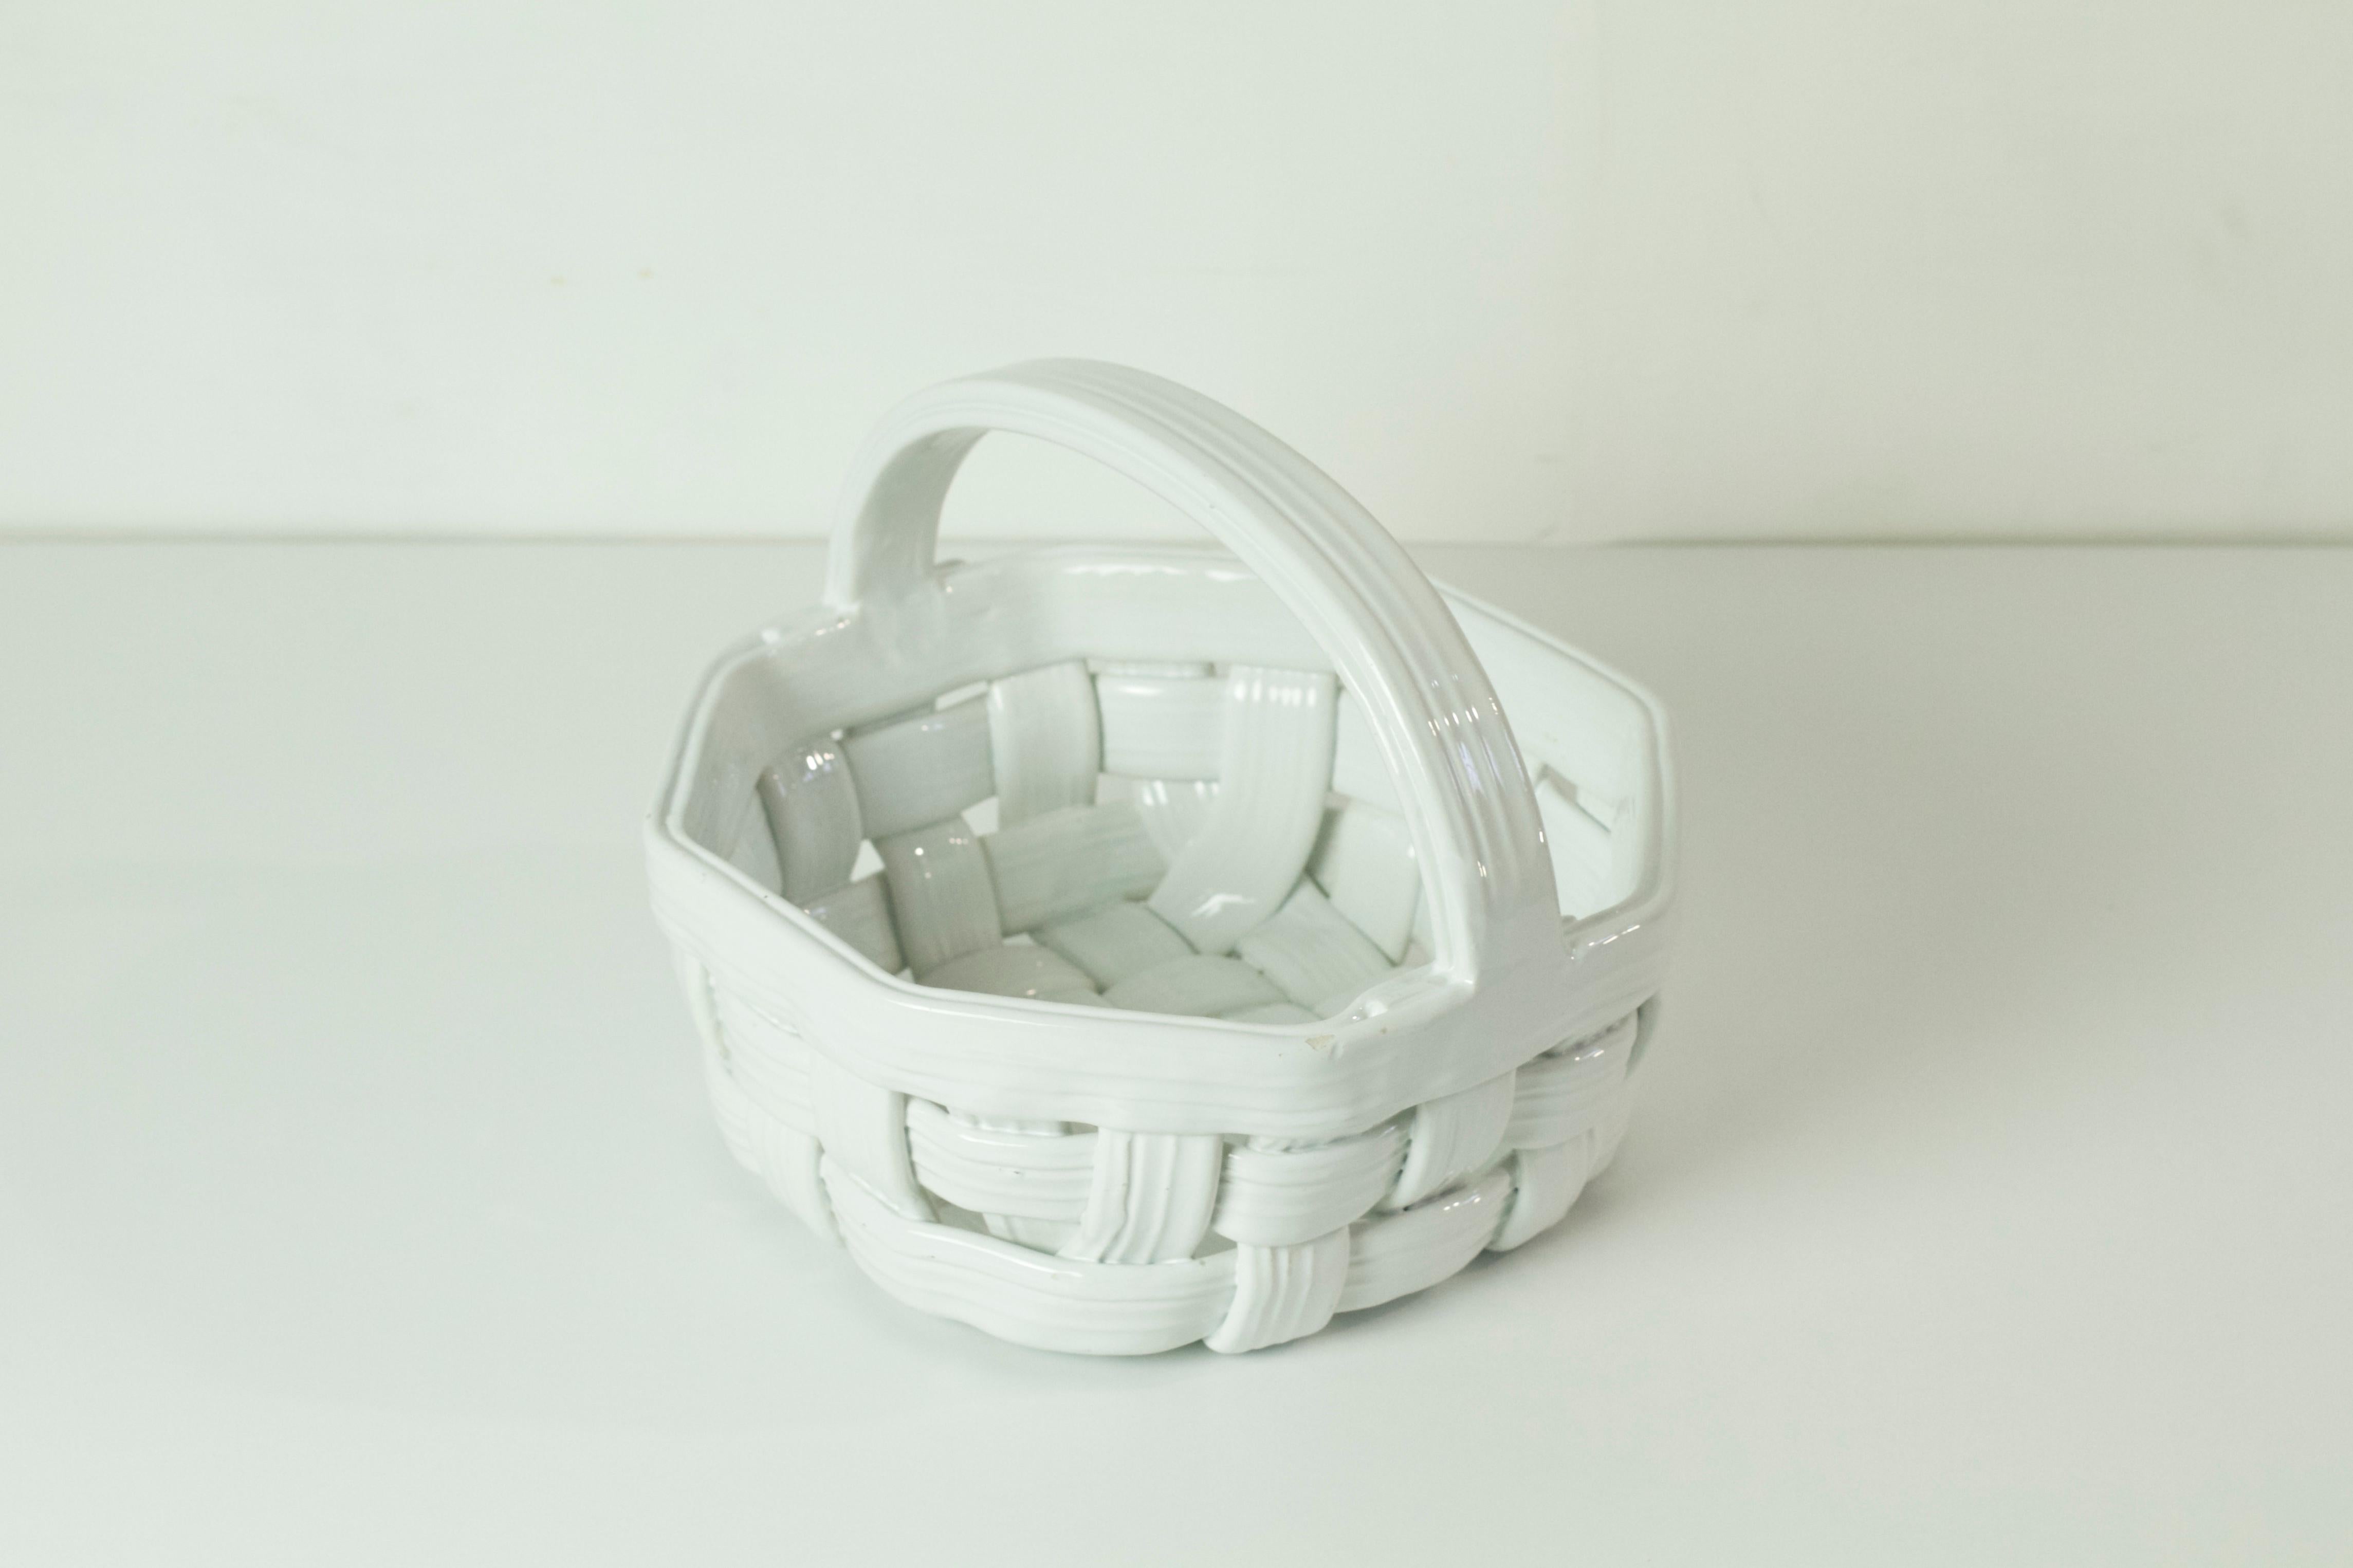 Handmade fruit basket in ceramic with a white glaze made in Italy. Perfect for the romantic looking country kitchen.